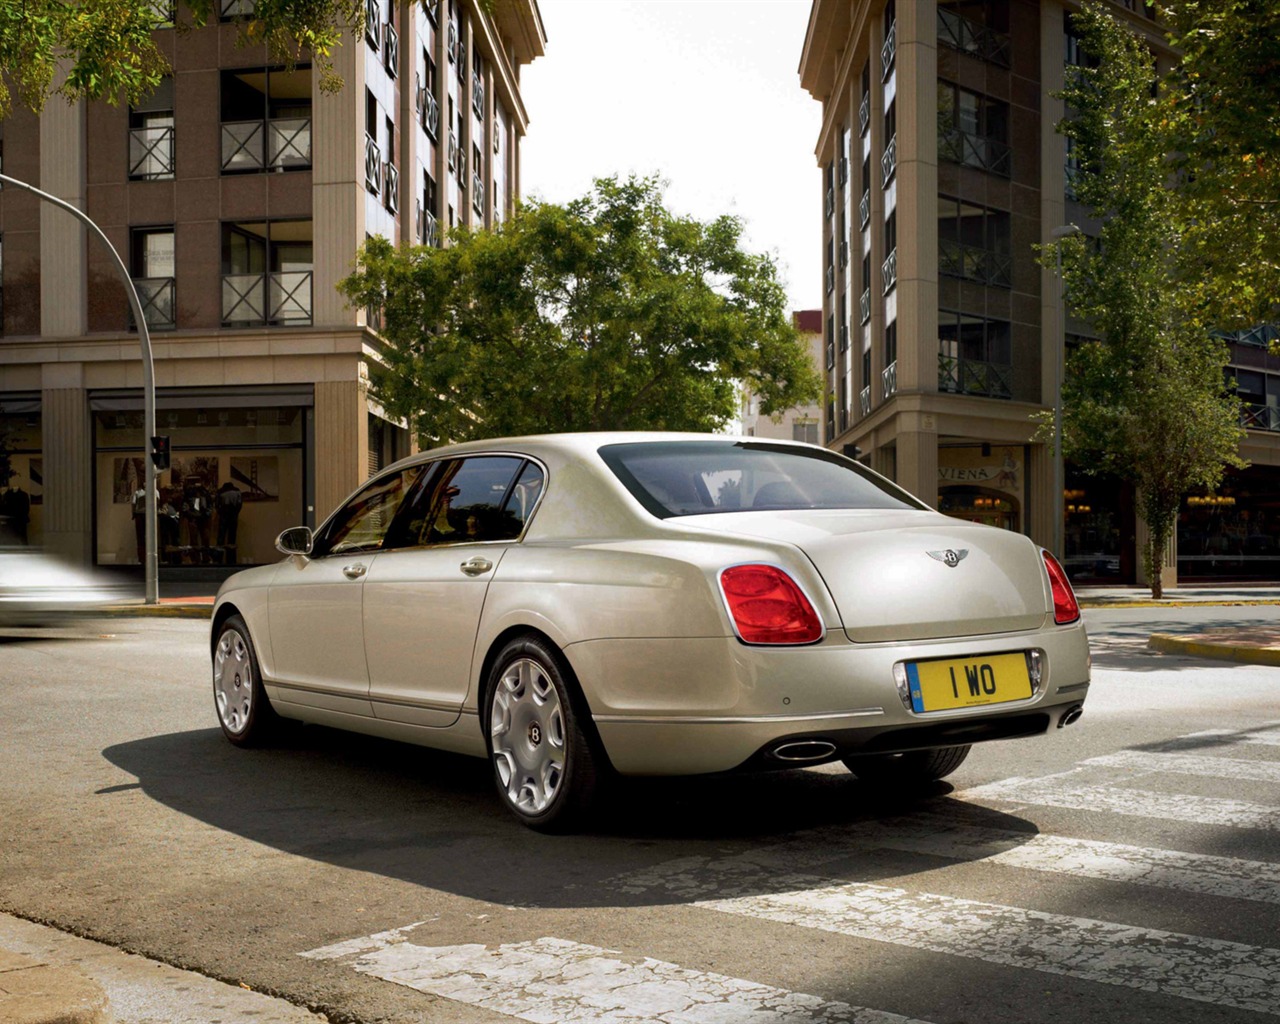 Bentley Continental Flying Spur - 2008 賓利 #6 - 1280x1024